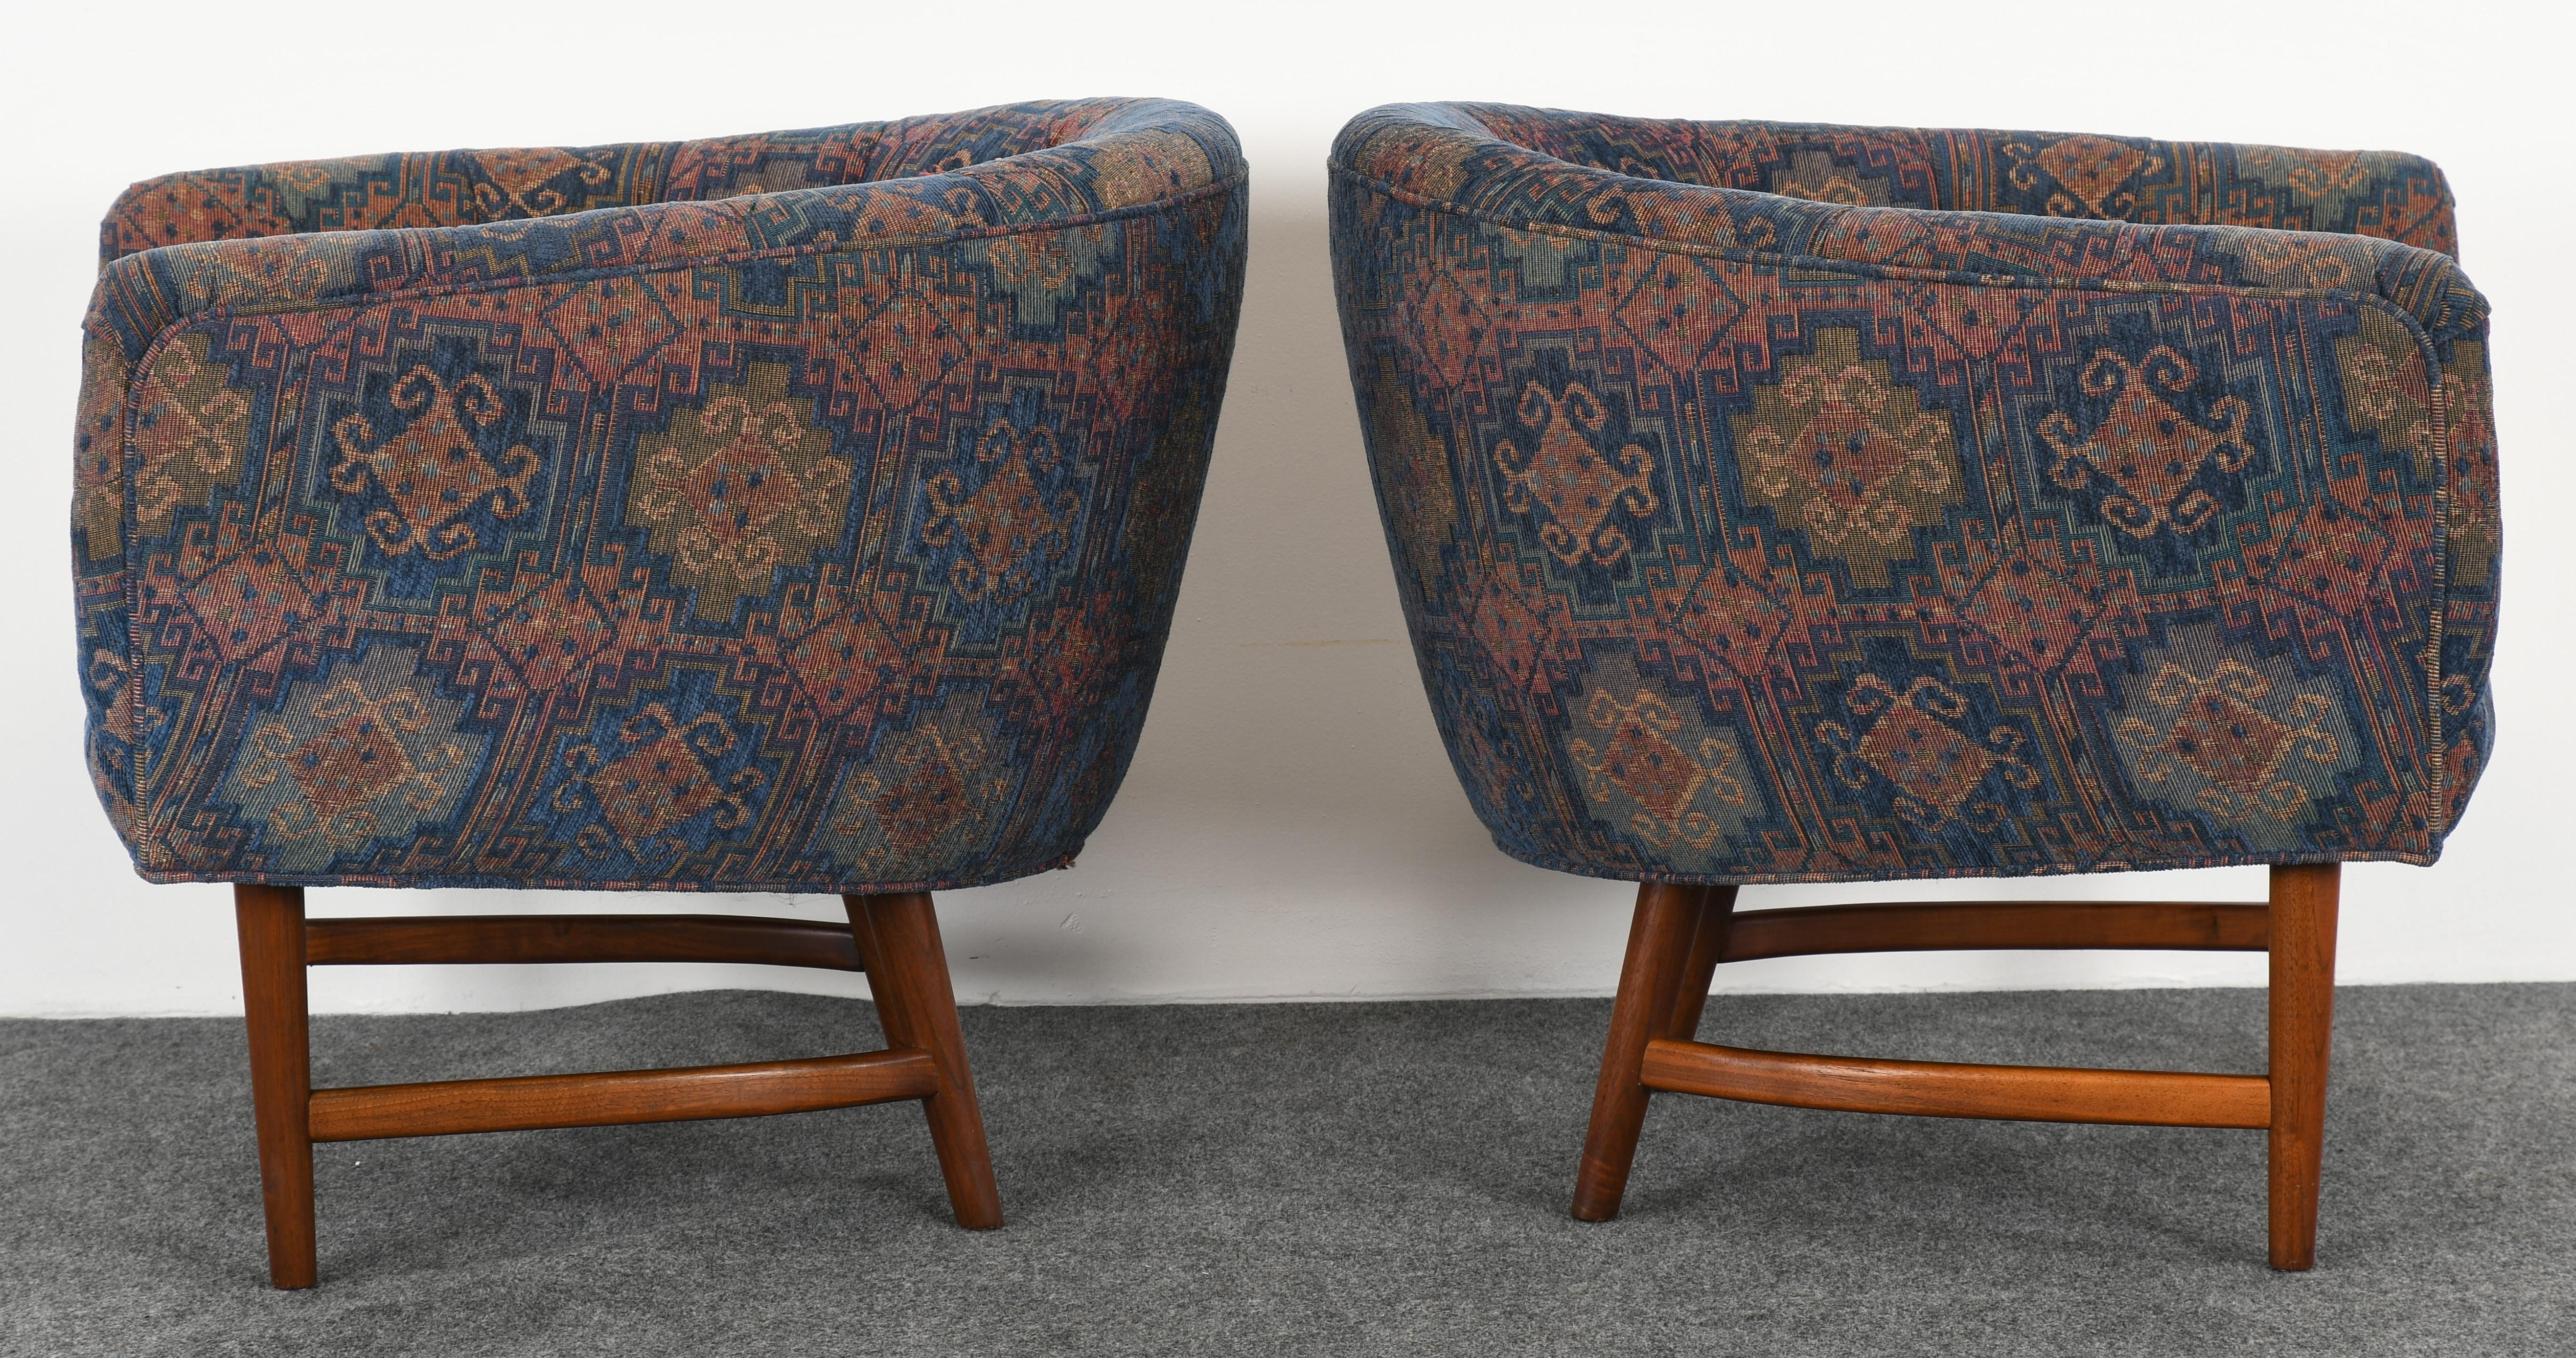 Upholstery Pair of Milo Baughman Barrel Back Lounge Chairs, 1960s